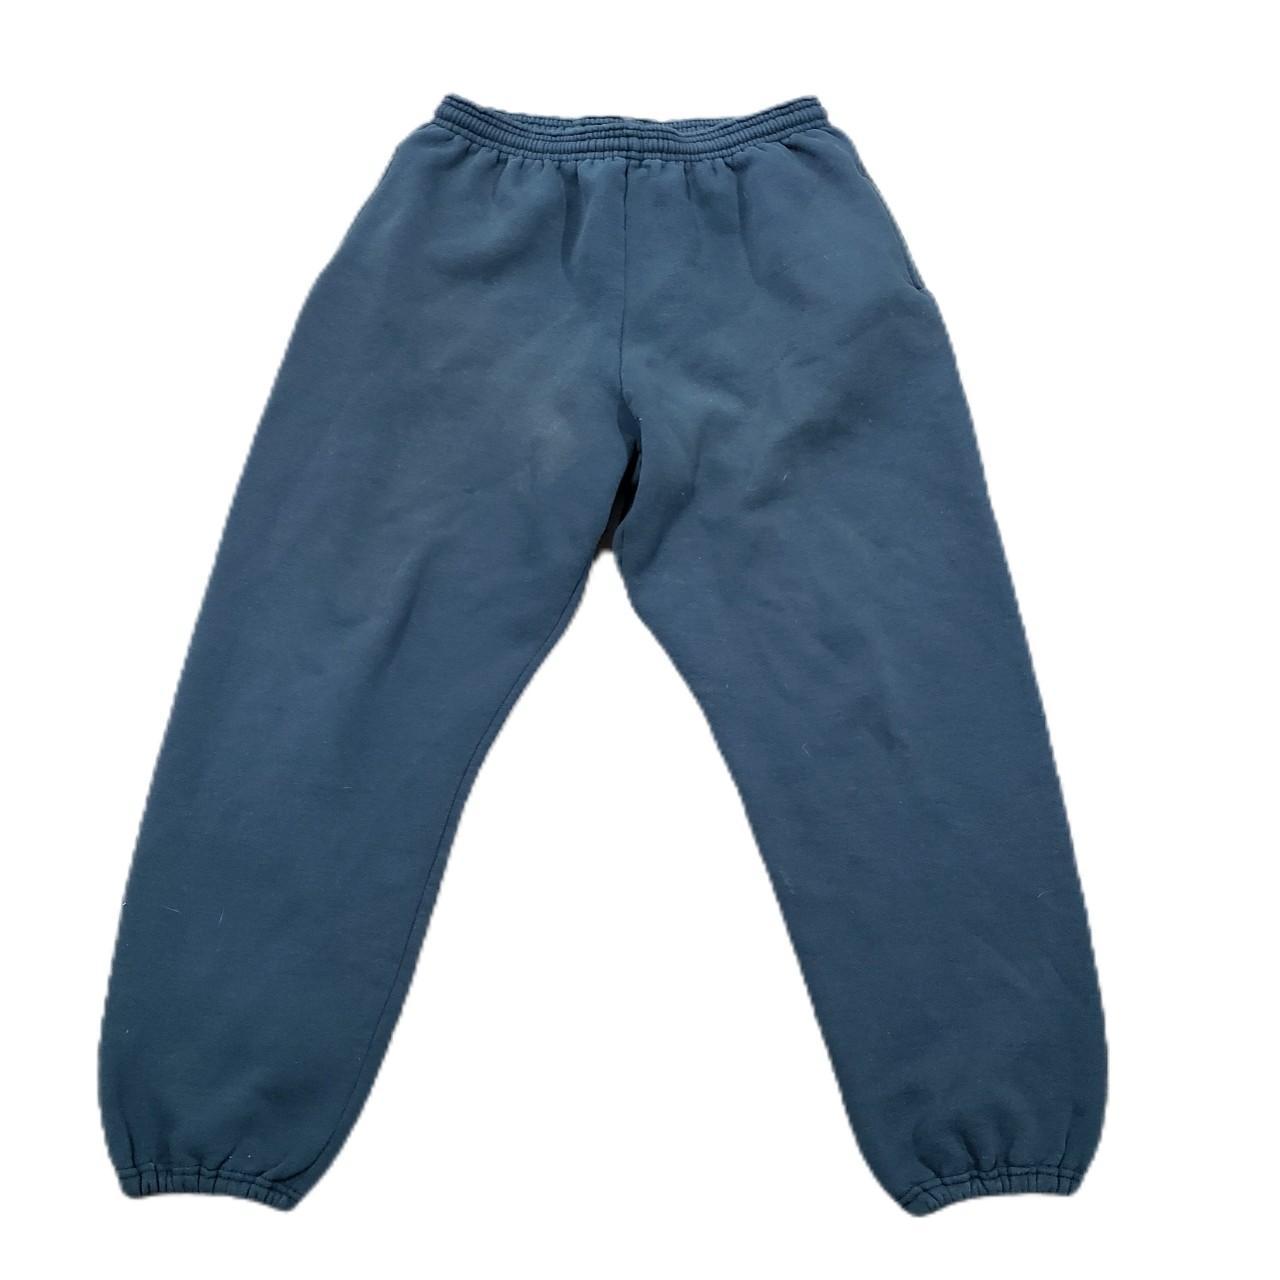 Product Image 1 - Men's Russell Athletic Sweatpants 

Size: